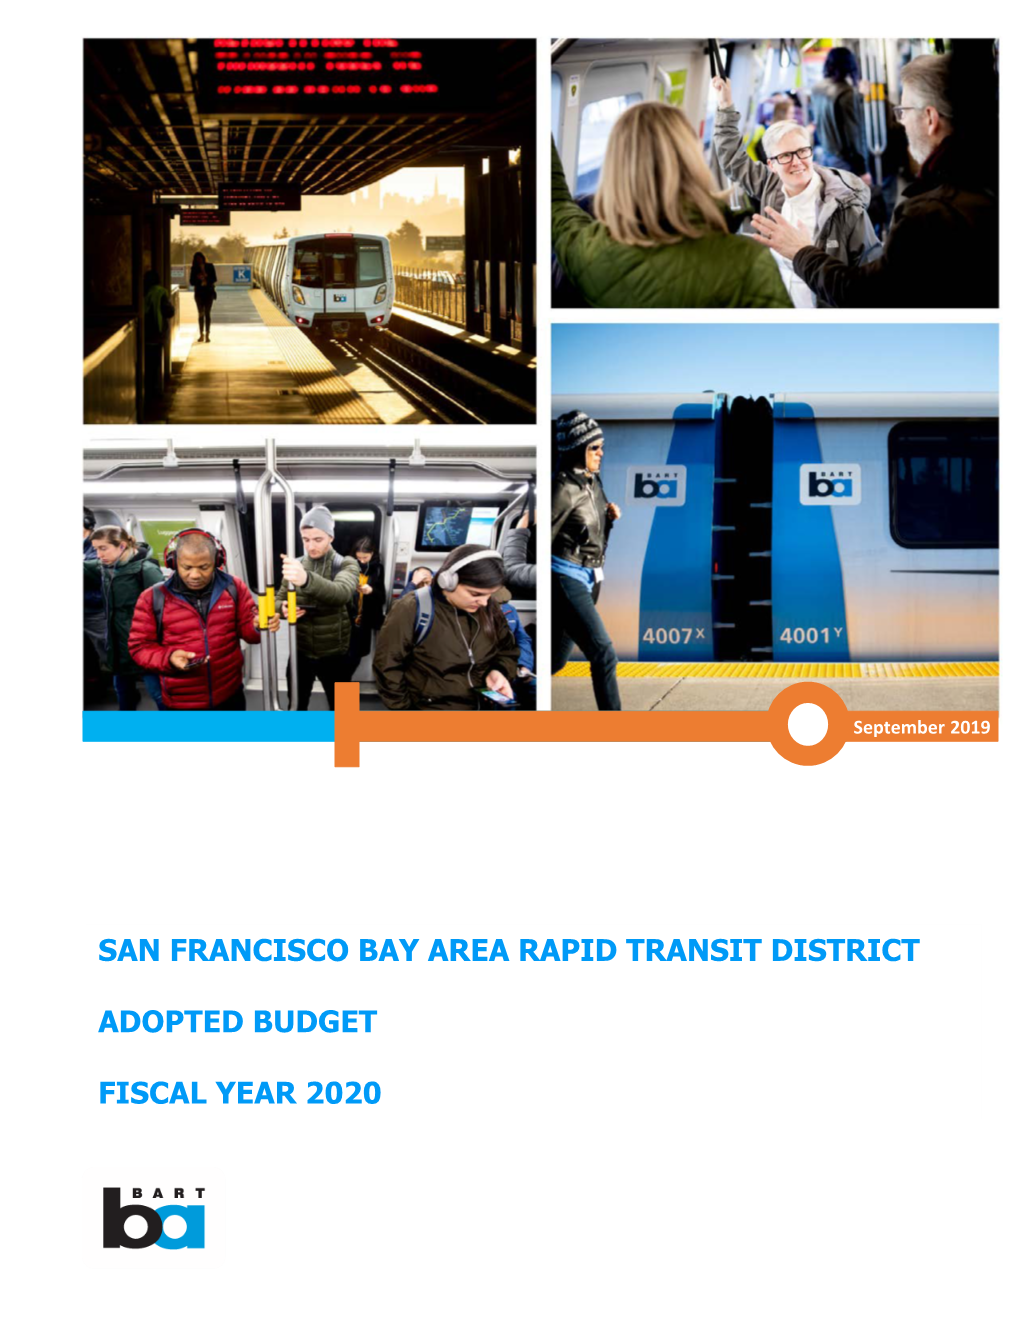 San Francisco Bay Area Rapid Transit District Adopted Budget Fiscal Year 2020